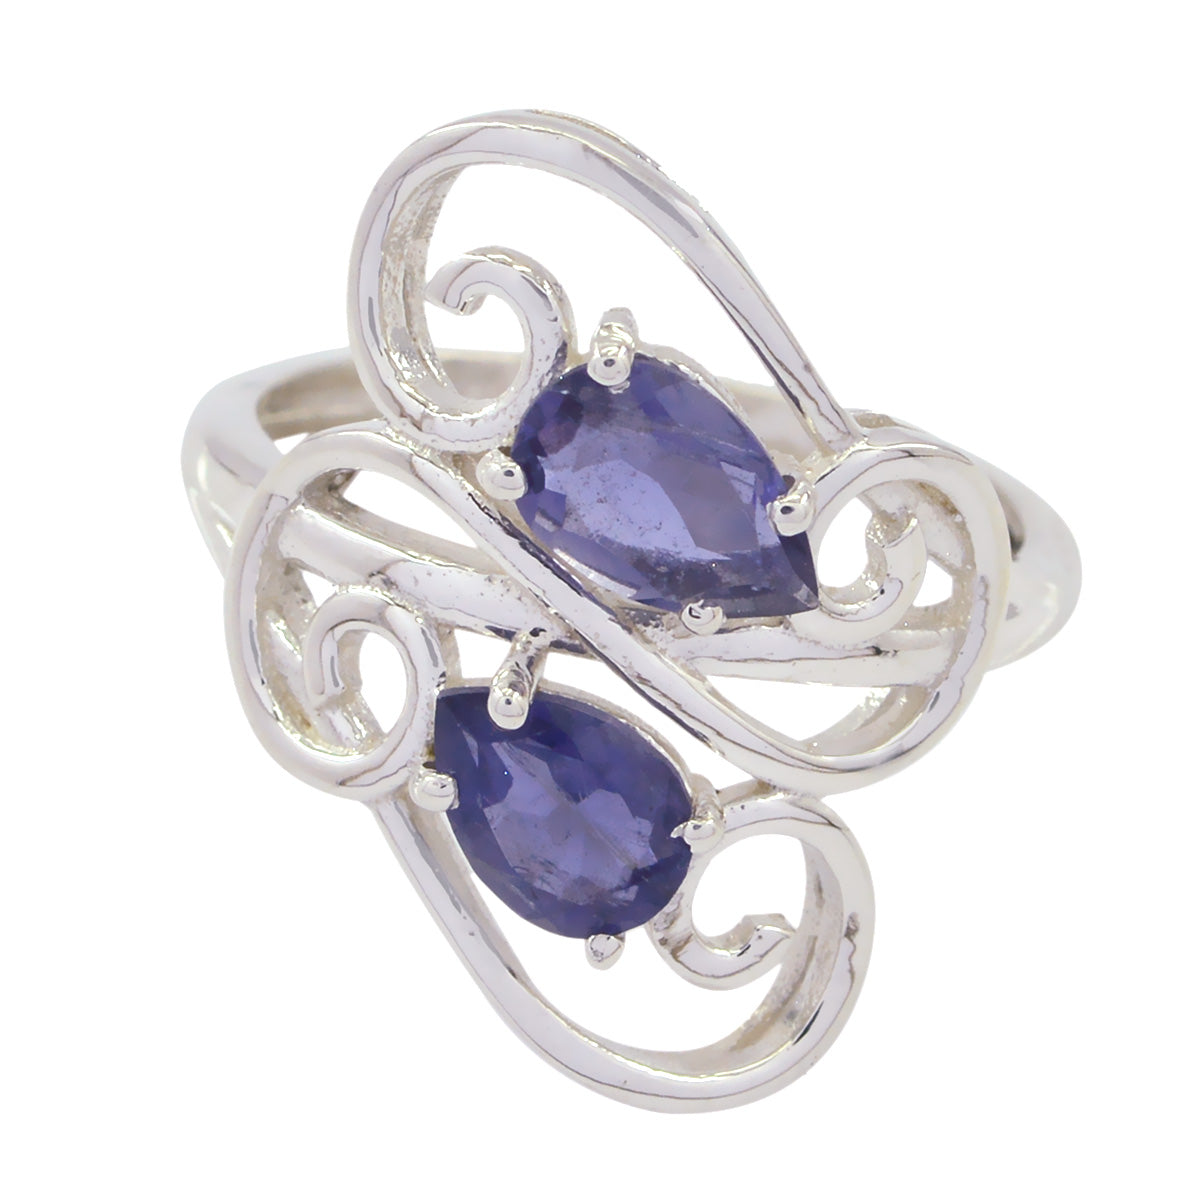 Statuesque Gemstones Iolite 925 Sterling Silver Rings Moroccan Jewelry